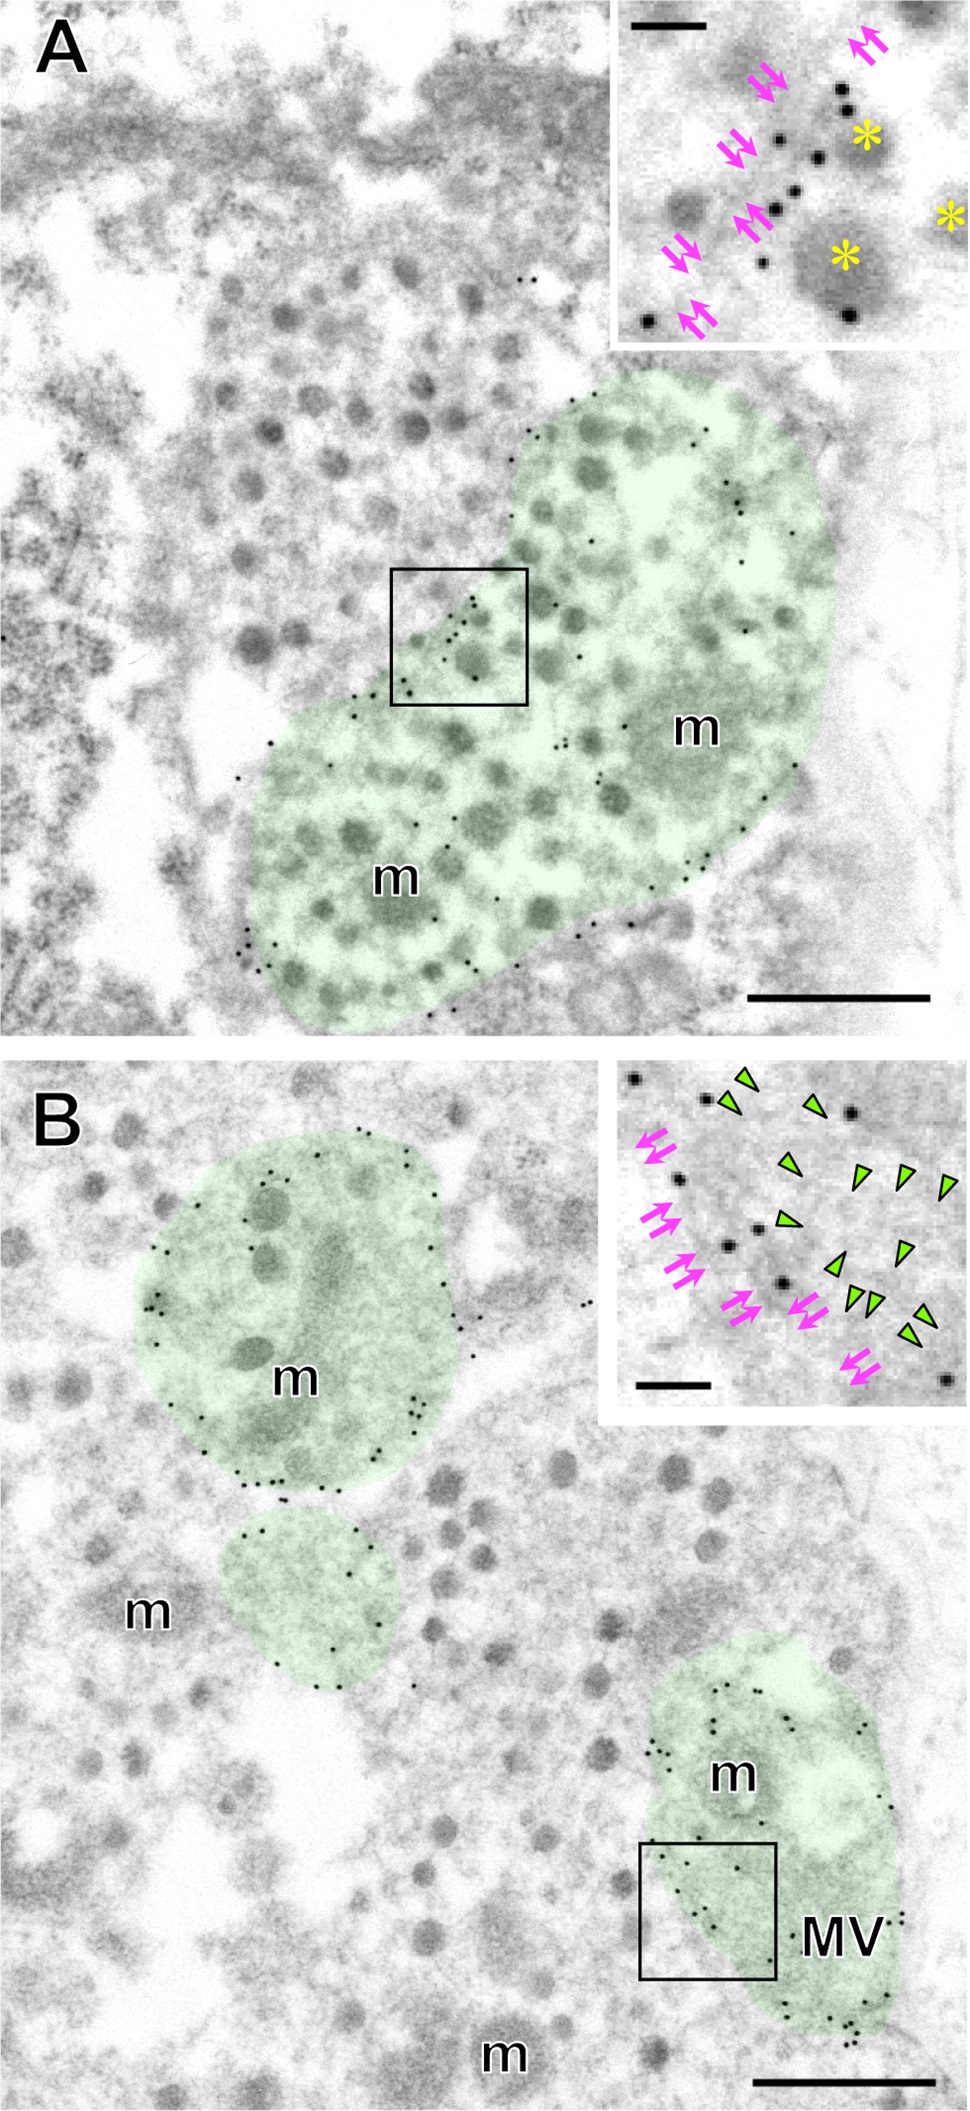 Membrane-Targeted palGFP Predominantly Localizes to the Plasma Membrane but not to Neurosecretory Vesicle Membranes in Rat Oxytocin Neurons